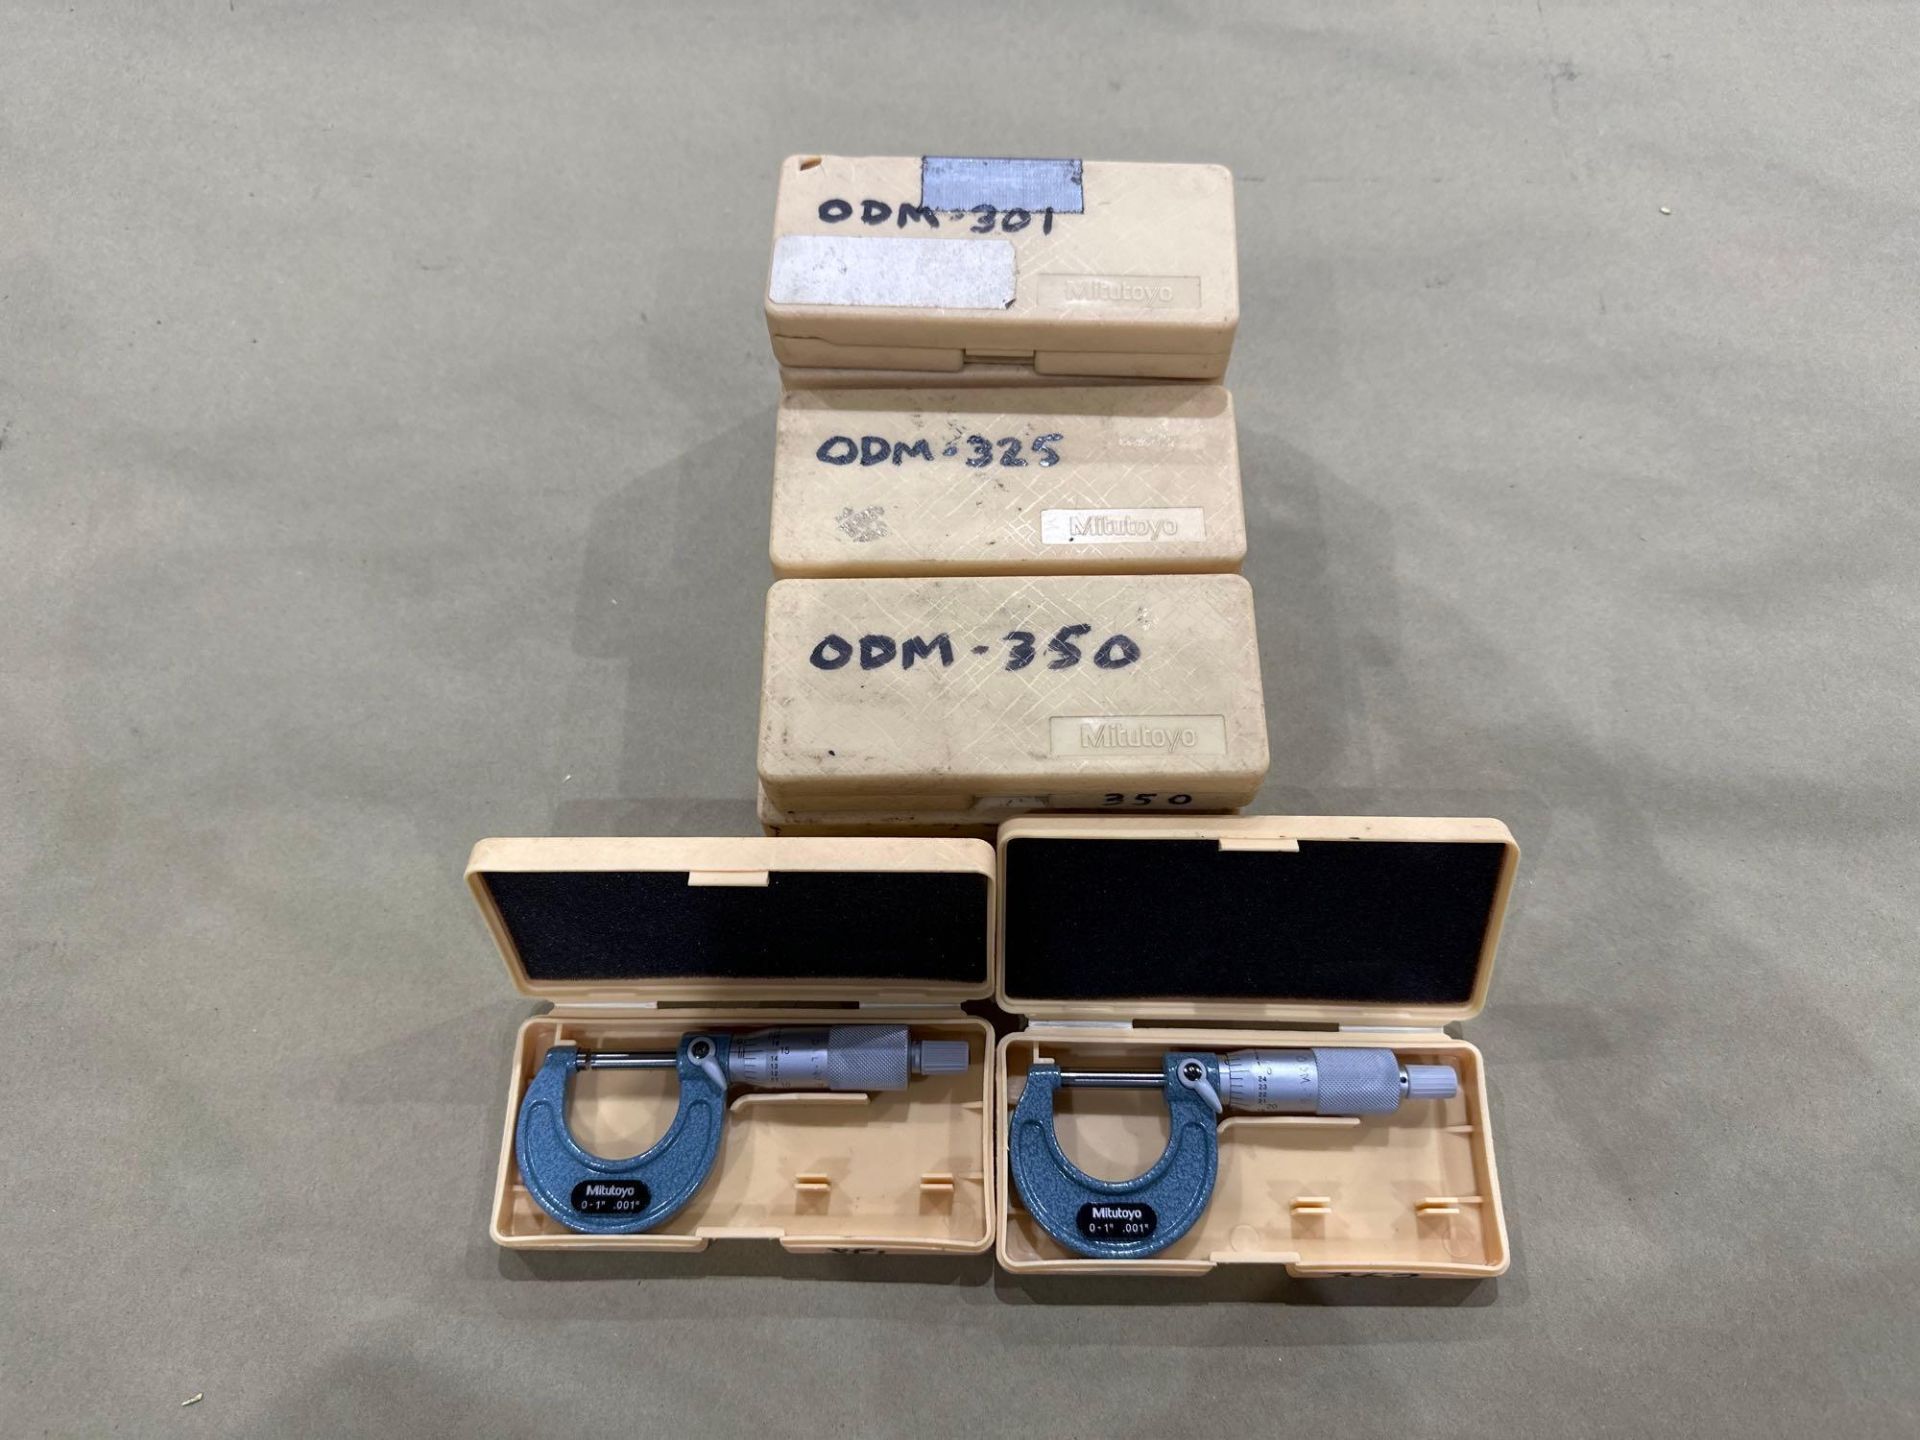 Lot of 12: Mitutoyo Mechanical OD Micrometer M110-1”, 0-1” Range, .001” Graduation, in plastic boxes - Image 7 of 7